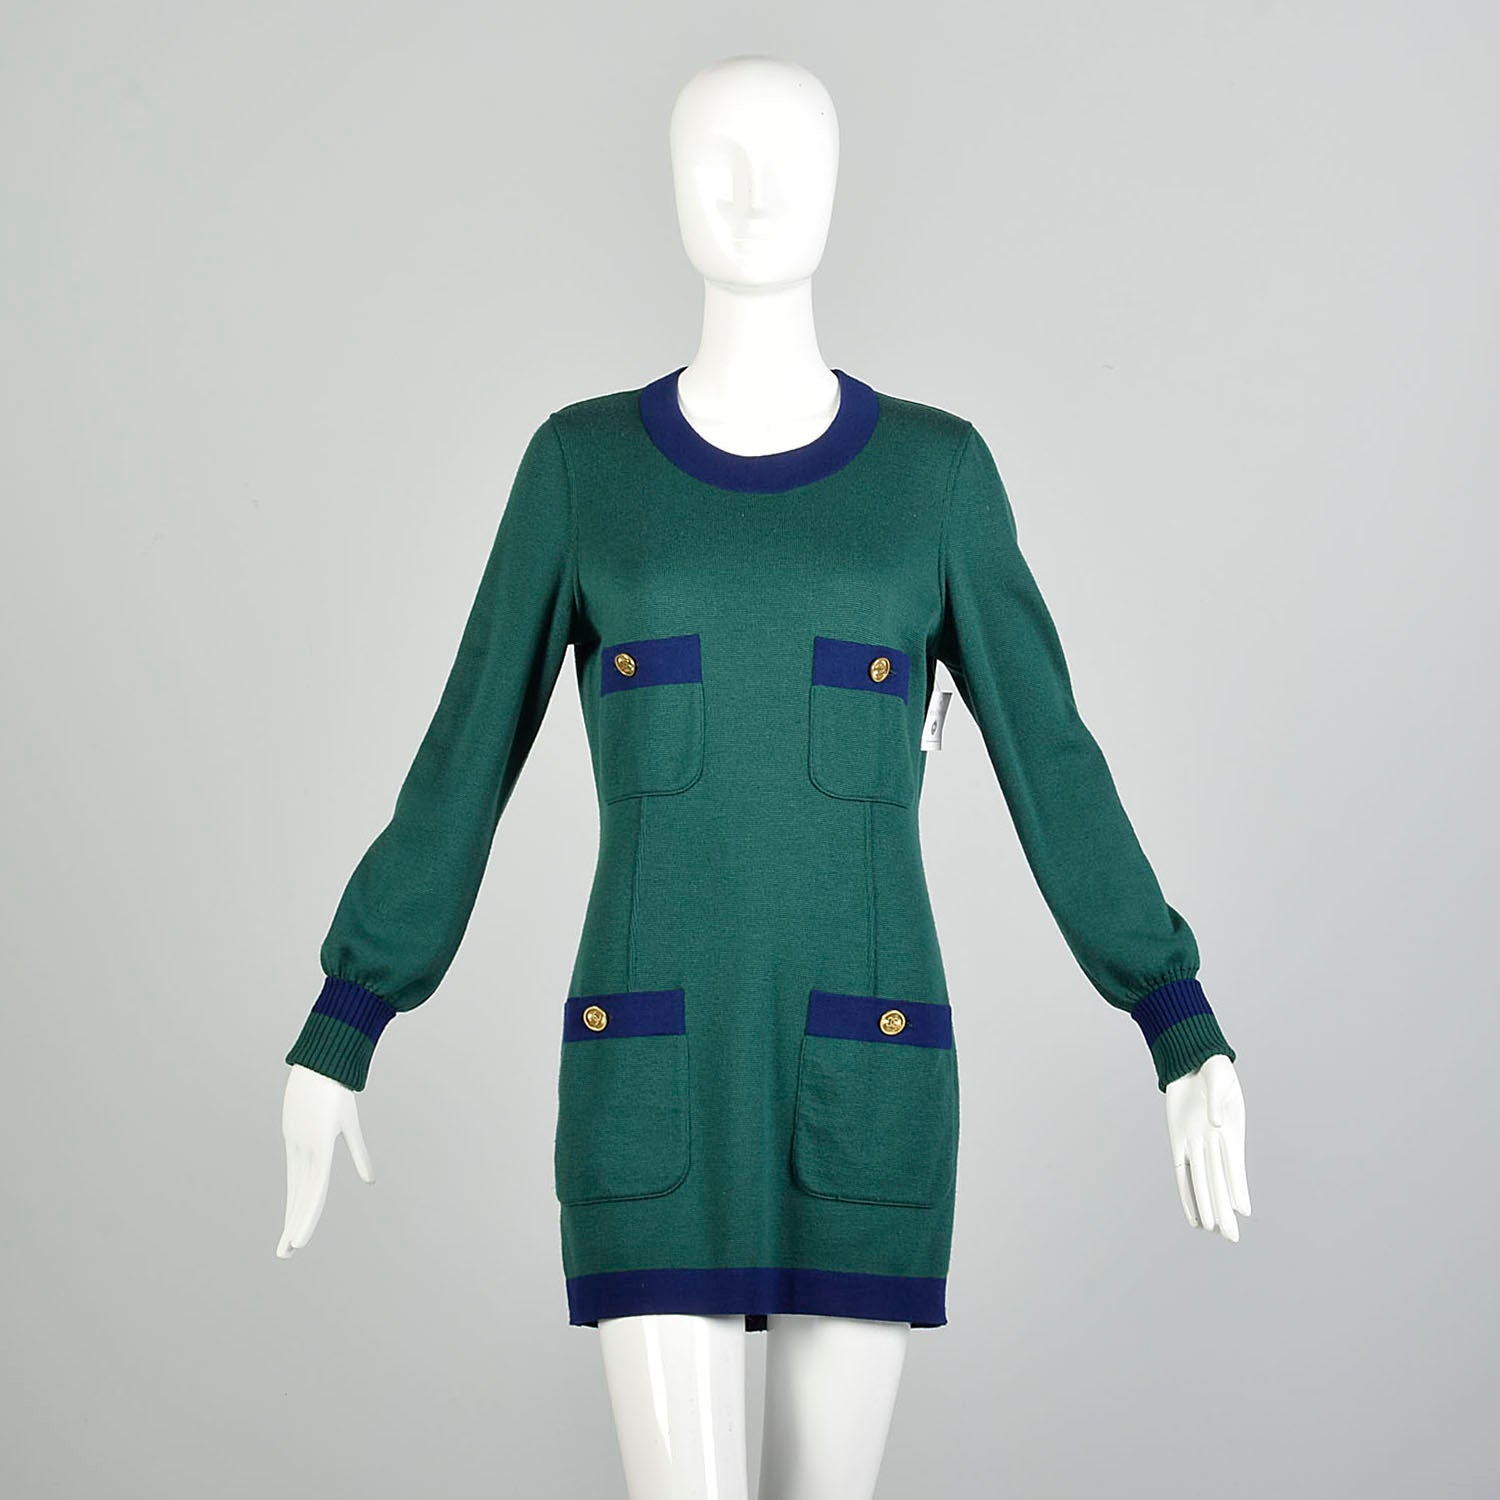 Chanel Boutique Autumn/Winter 1990/1991 Sweater Dress Green Navy Mini Long Sleeve with Tags